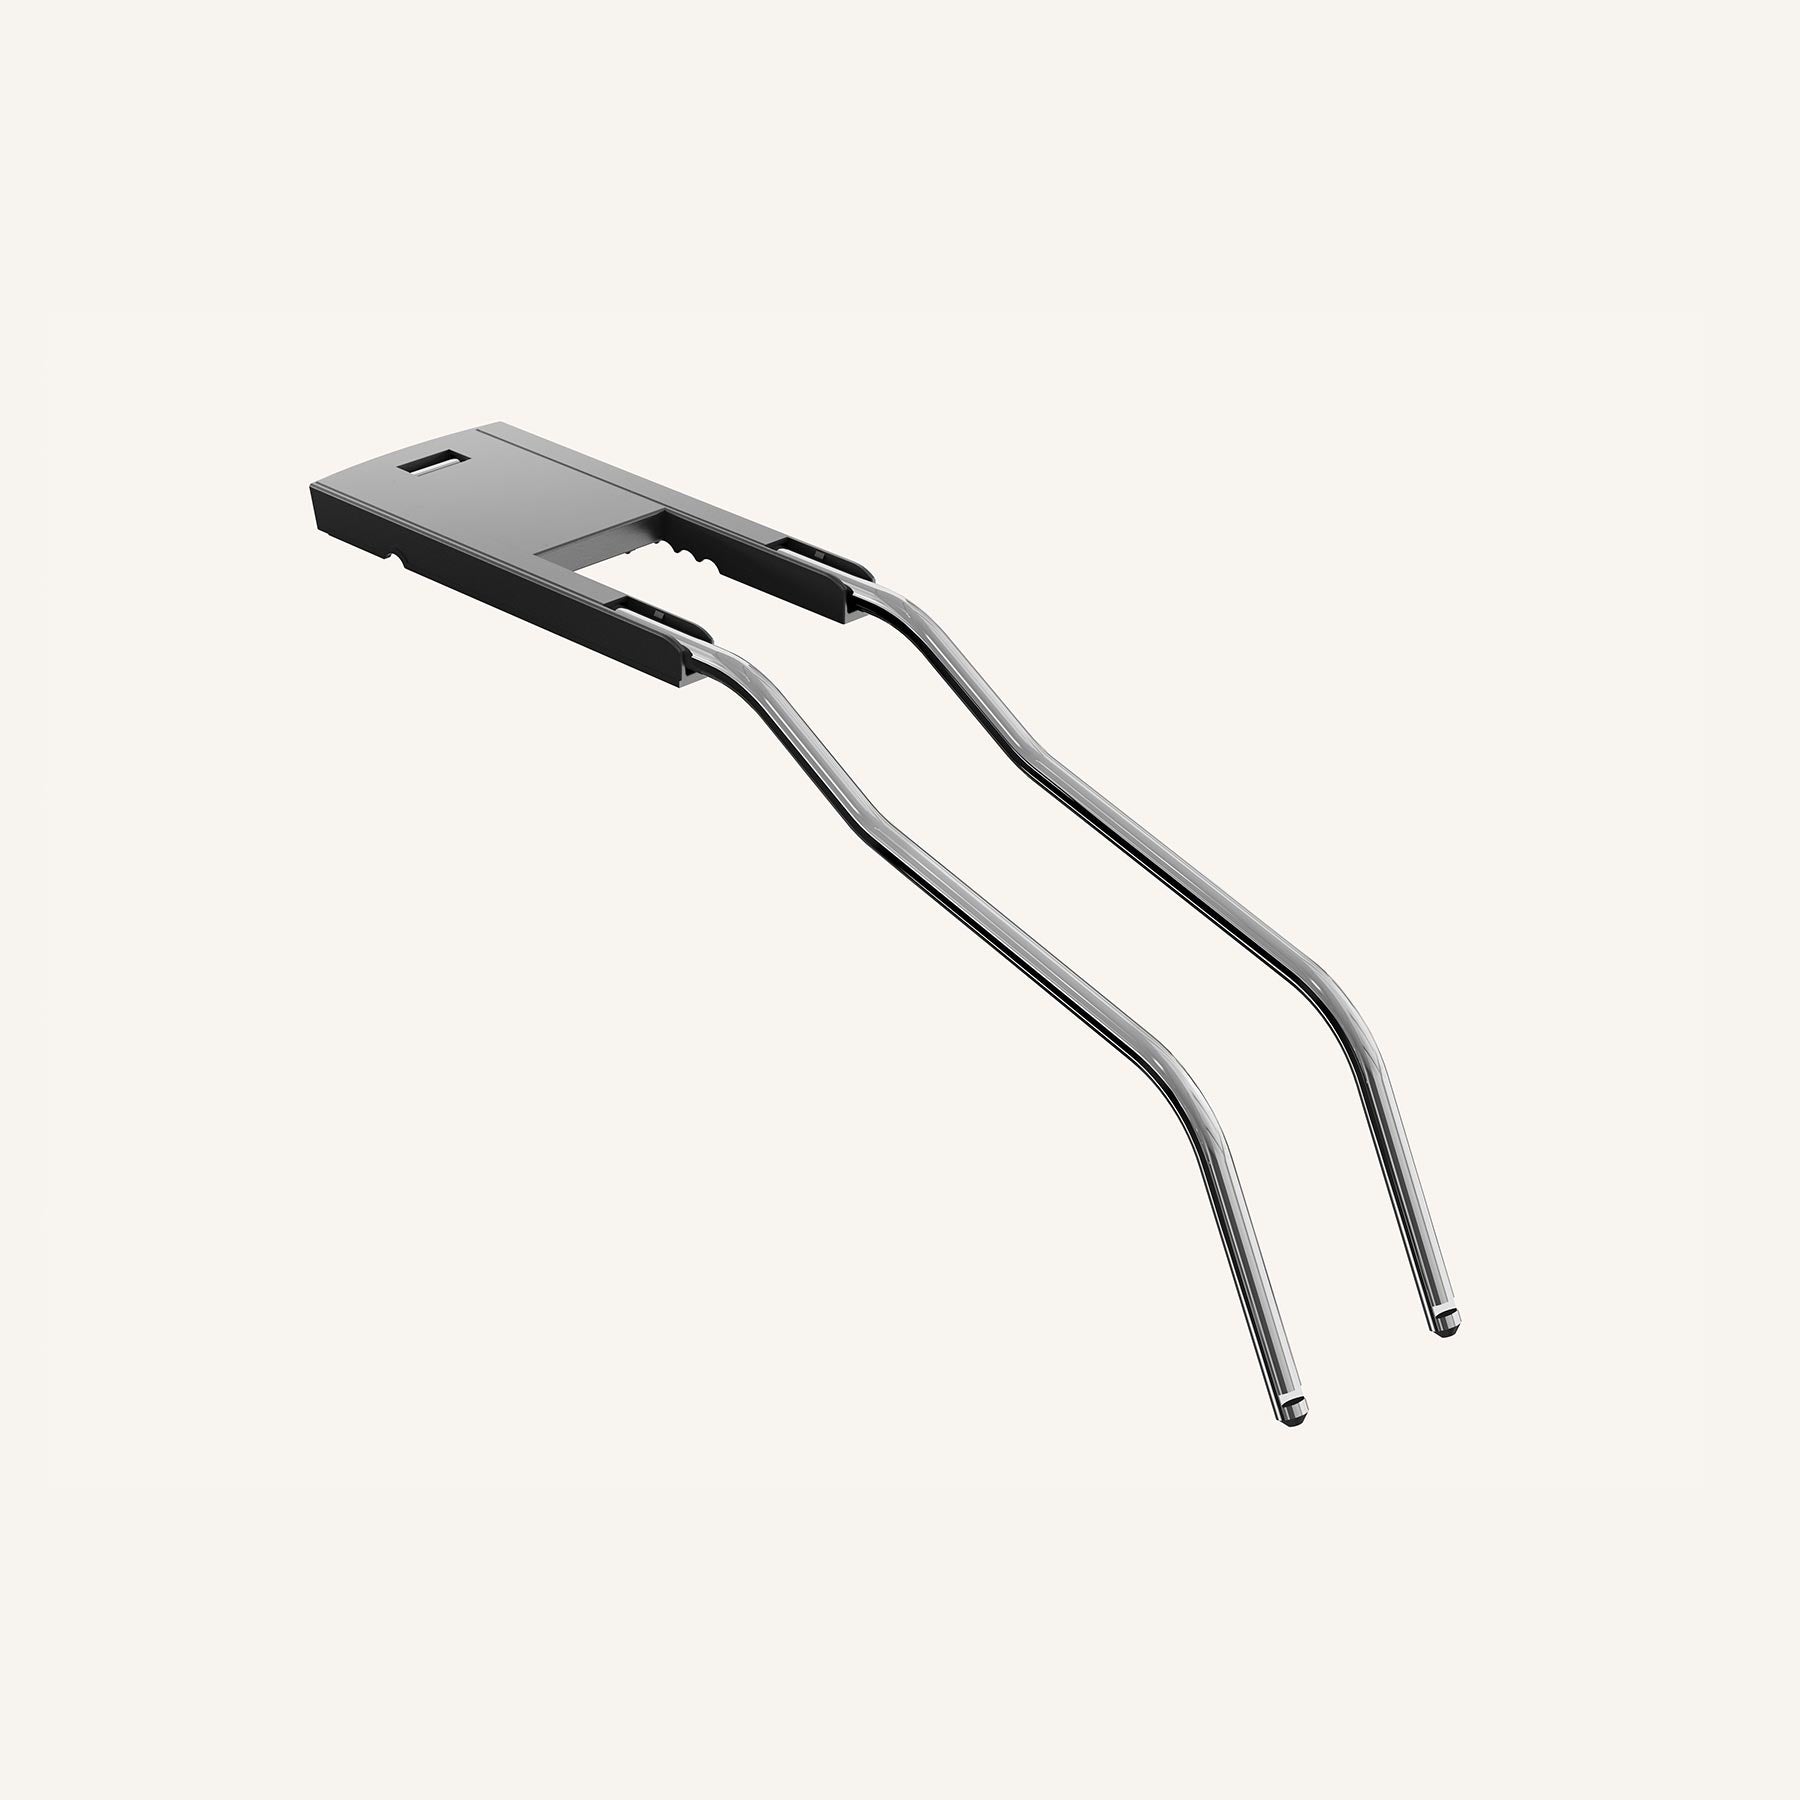 Thule RideAlong Low Saddle Adapter for e-bike